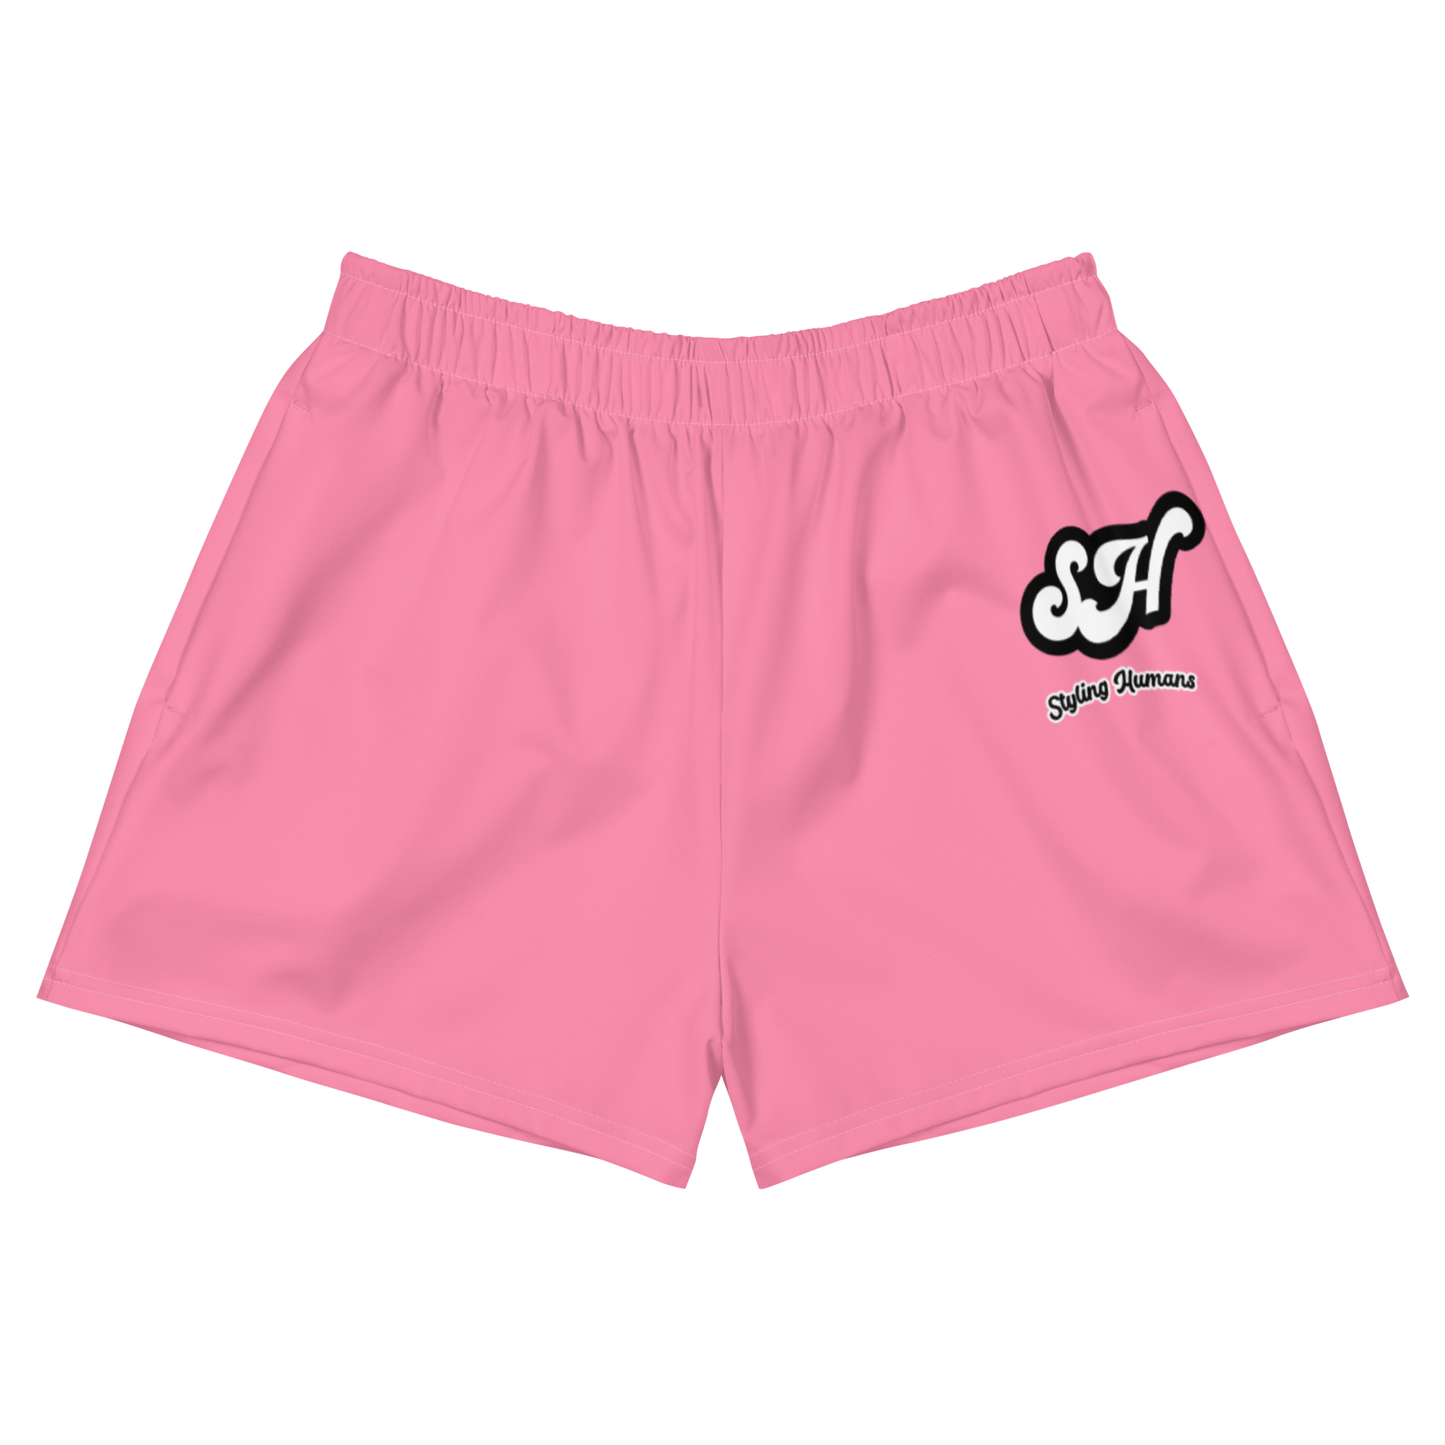 Pink Women’s Recycled Athletic Shorts